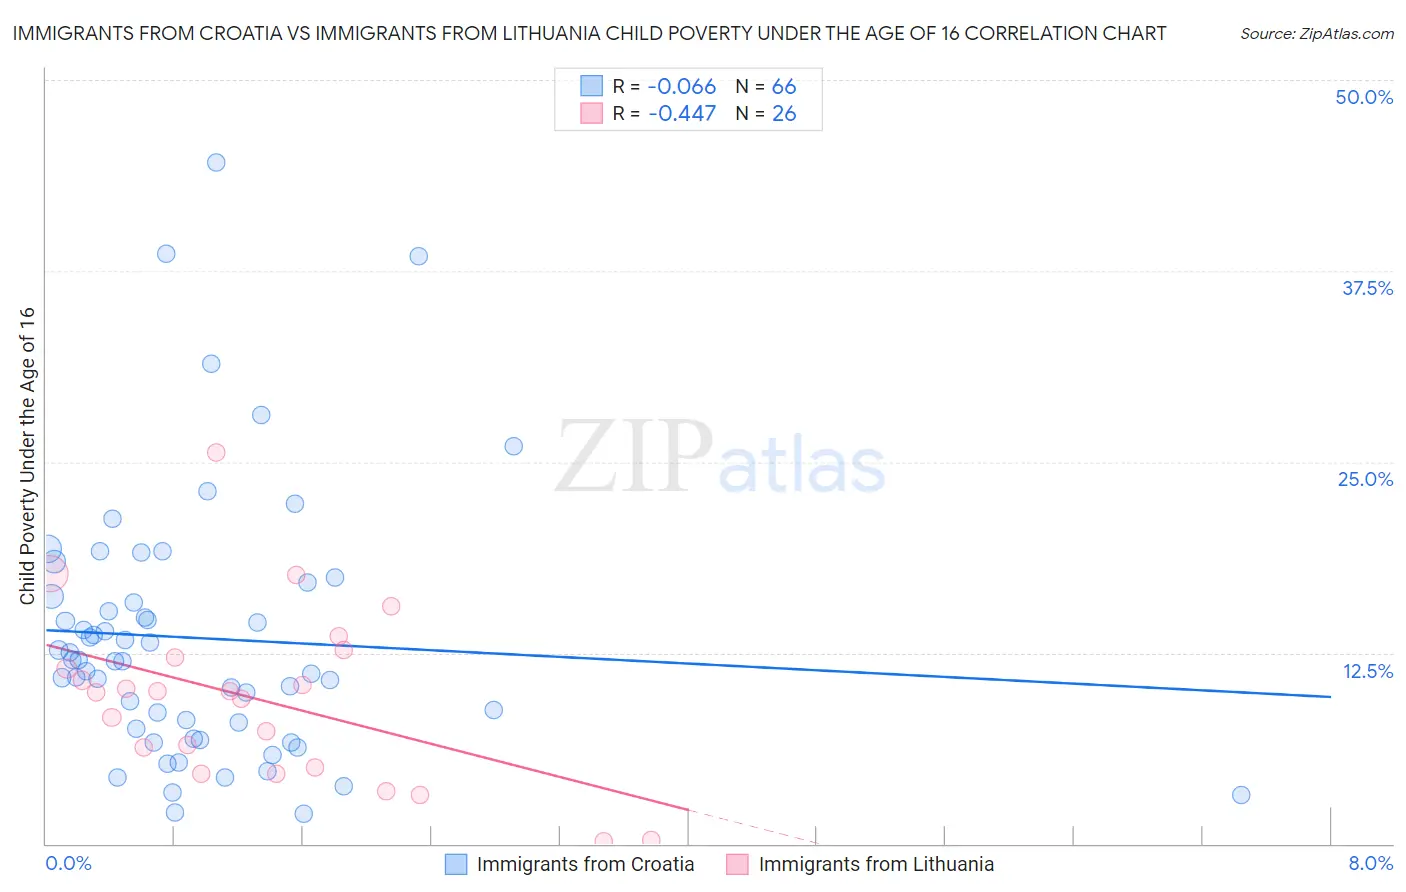 Immigrants from Croatia vs Immigrants from Lithuania Child Poverty Under the Age of 16